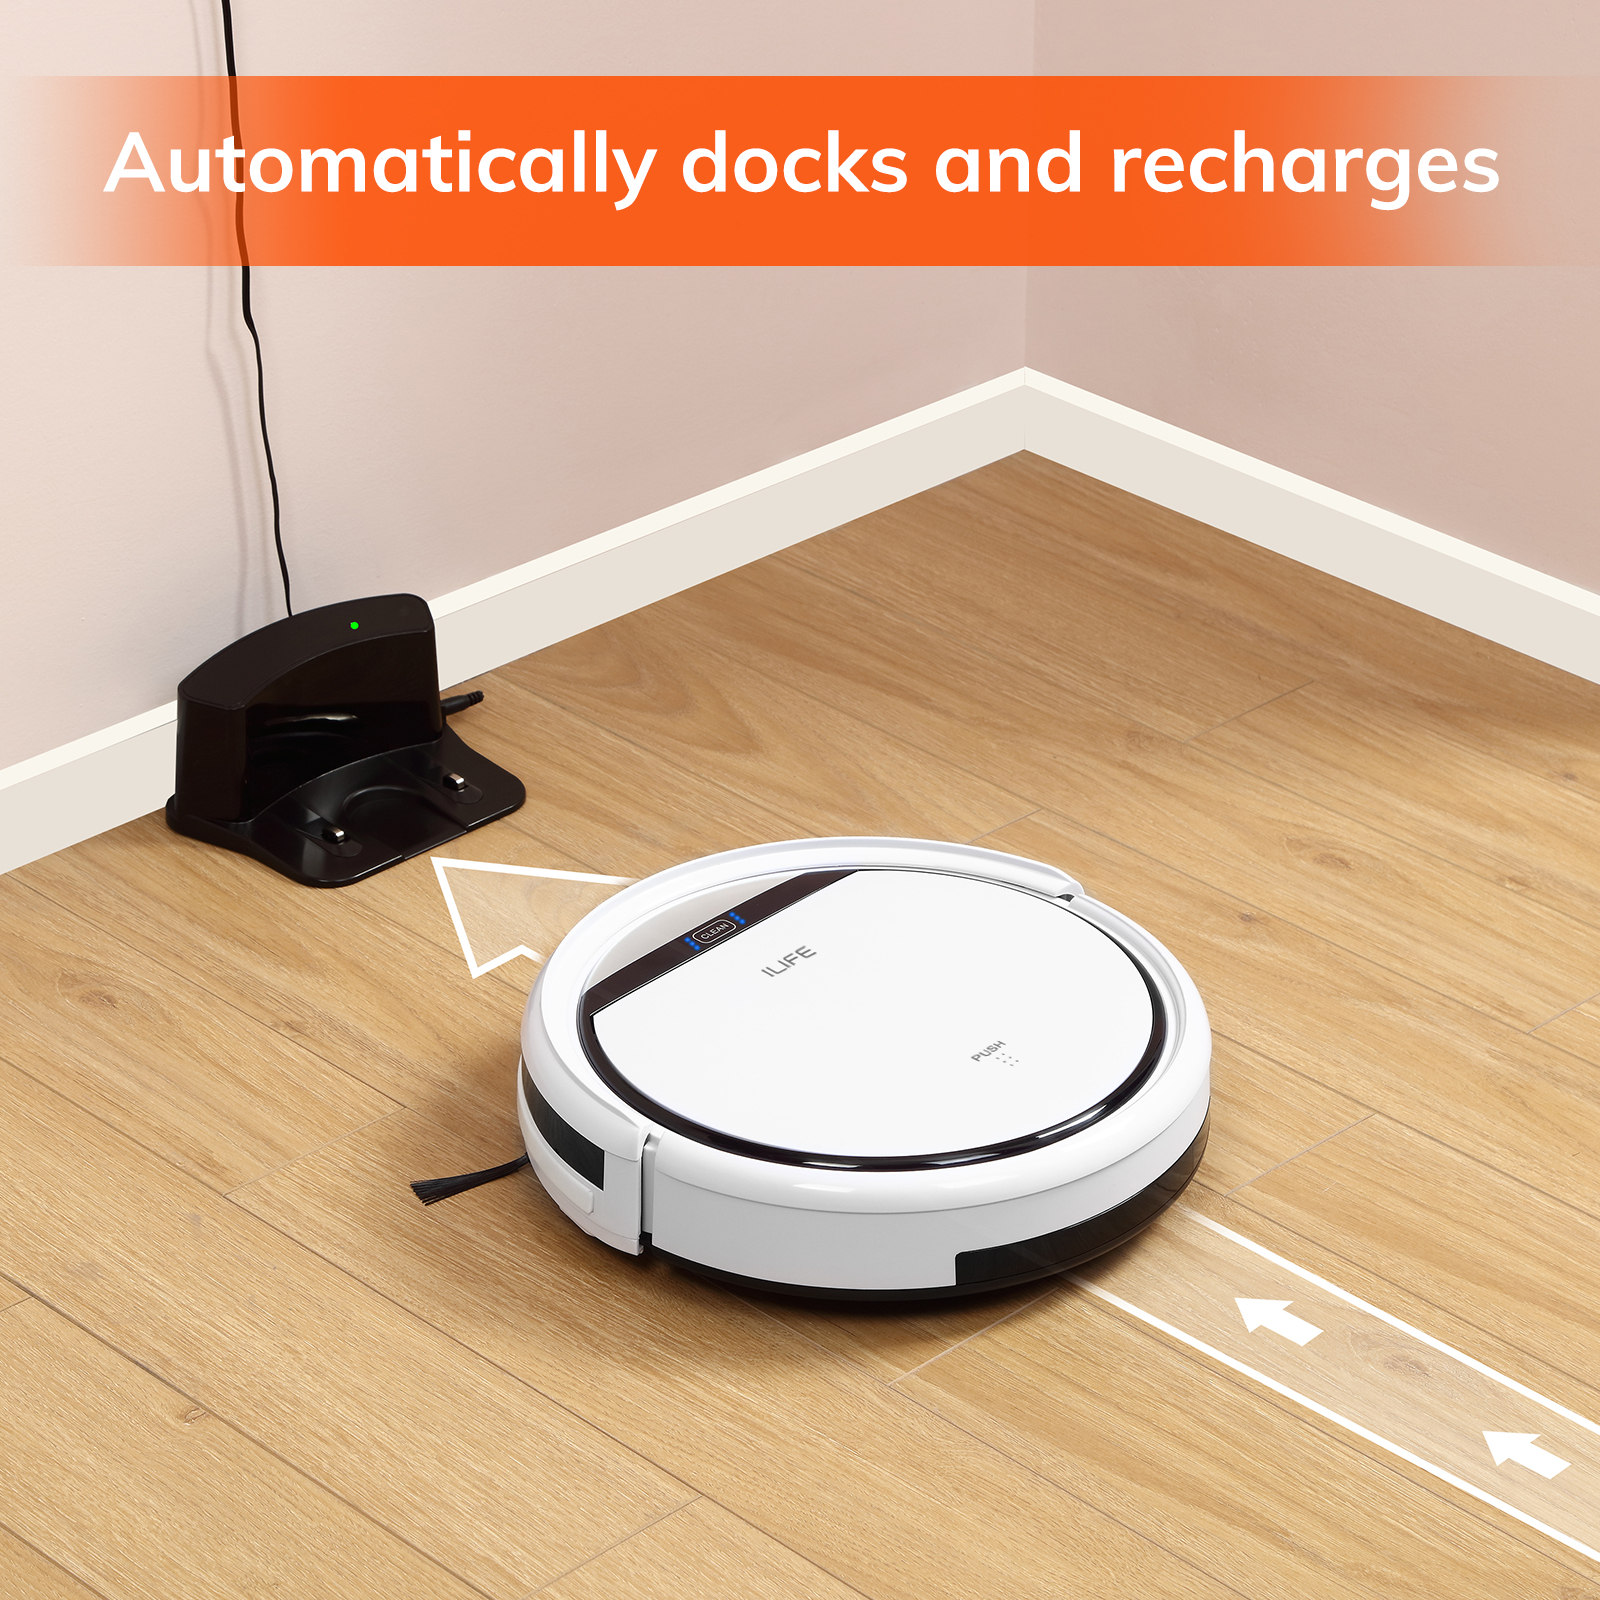 ILIFE V3sPro Robotic Vacuum Cleaner With Power Suction Great for Pet Shedding - image 4 of 6